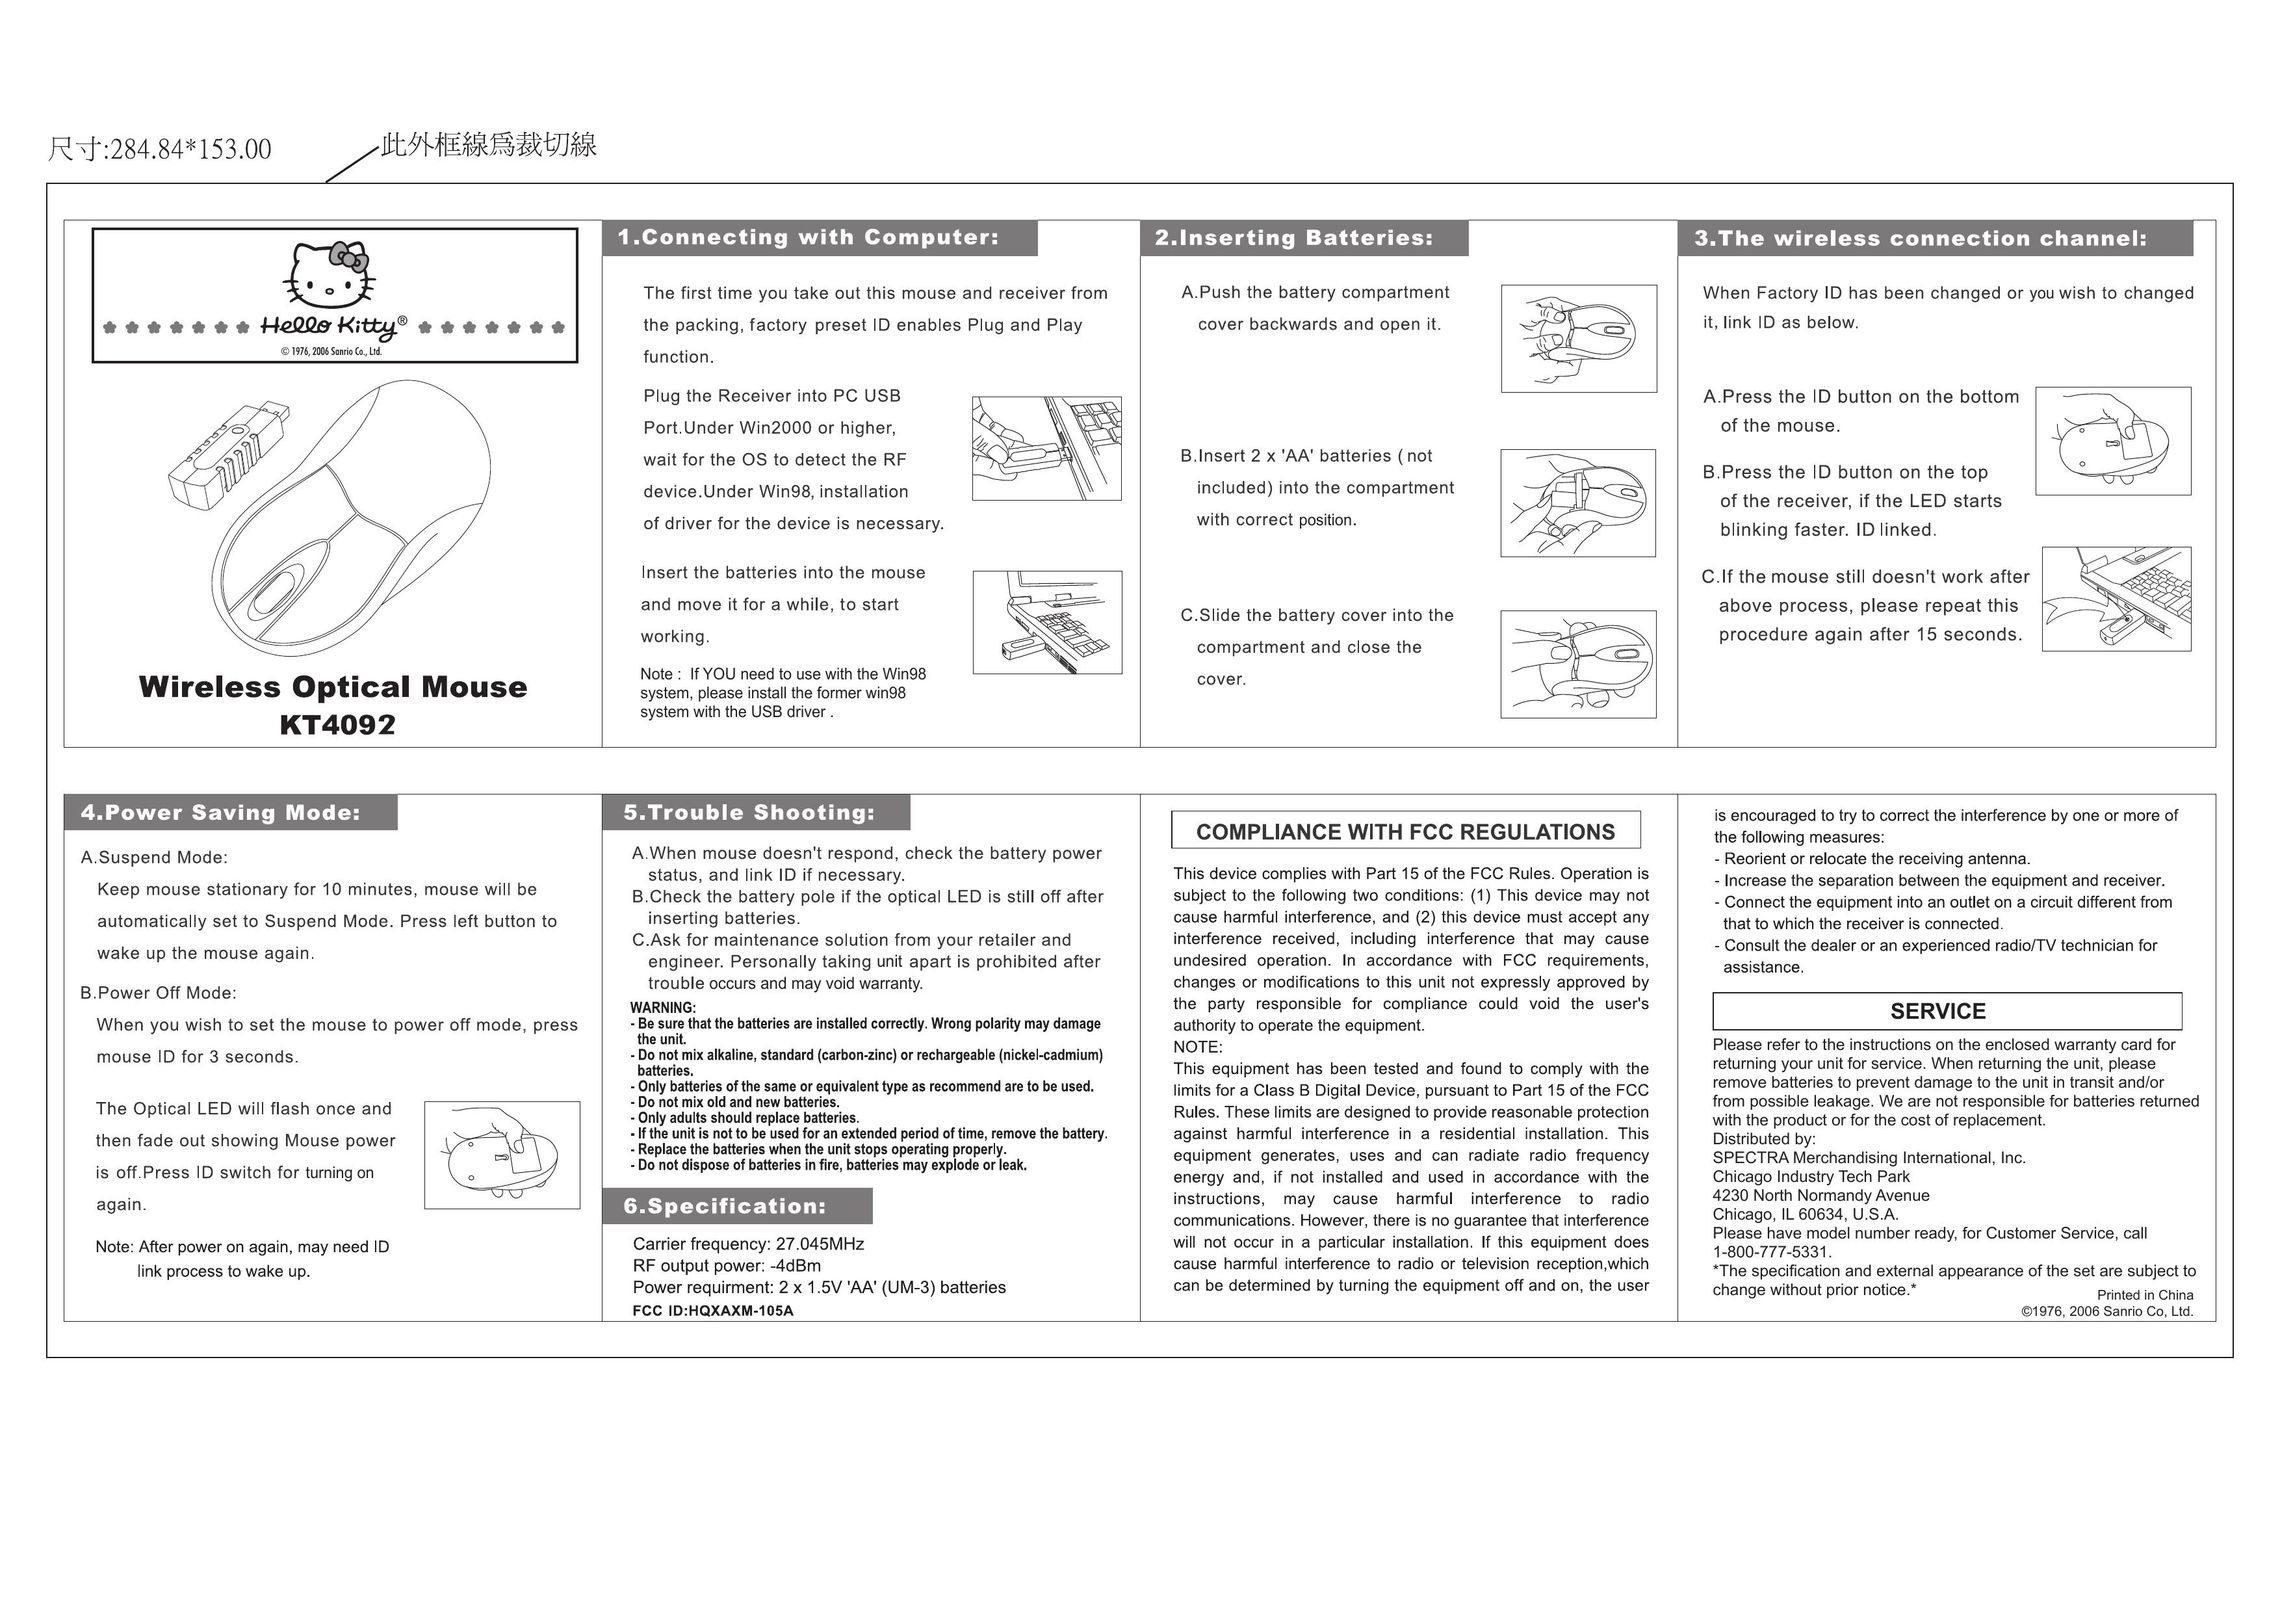 Spectra KT4092 Mouse User Manual